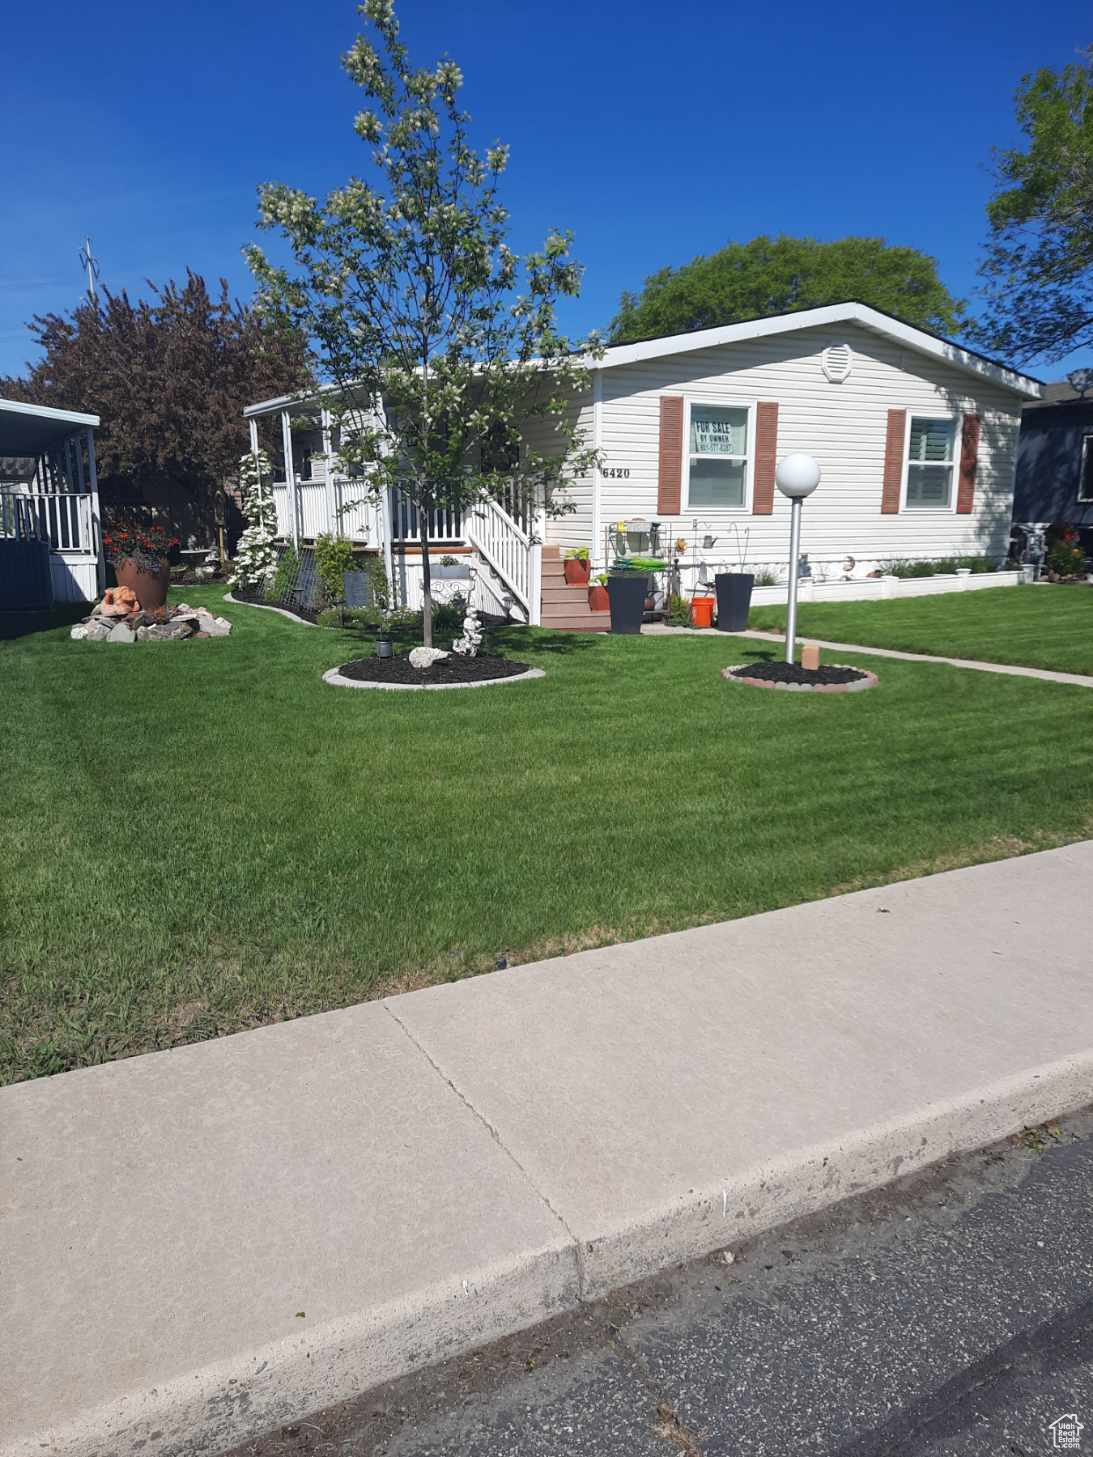 Front of Home - Beautiful Landscaped Yard!